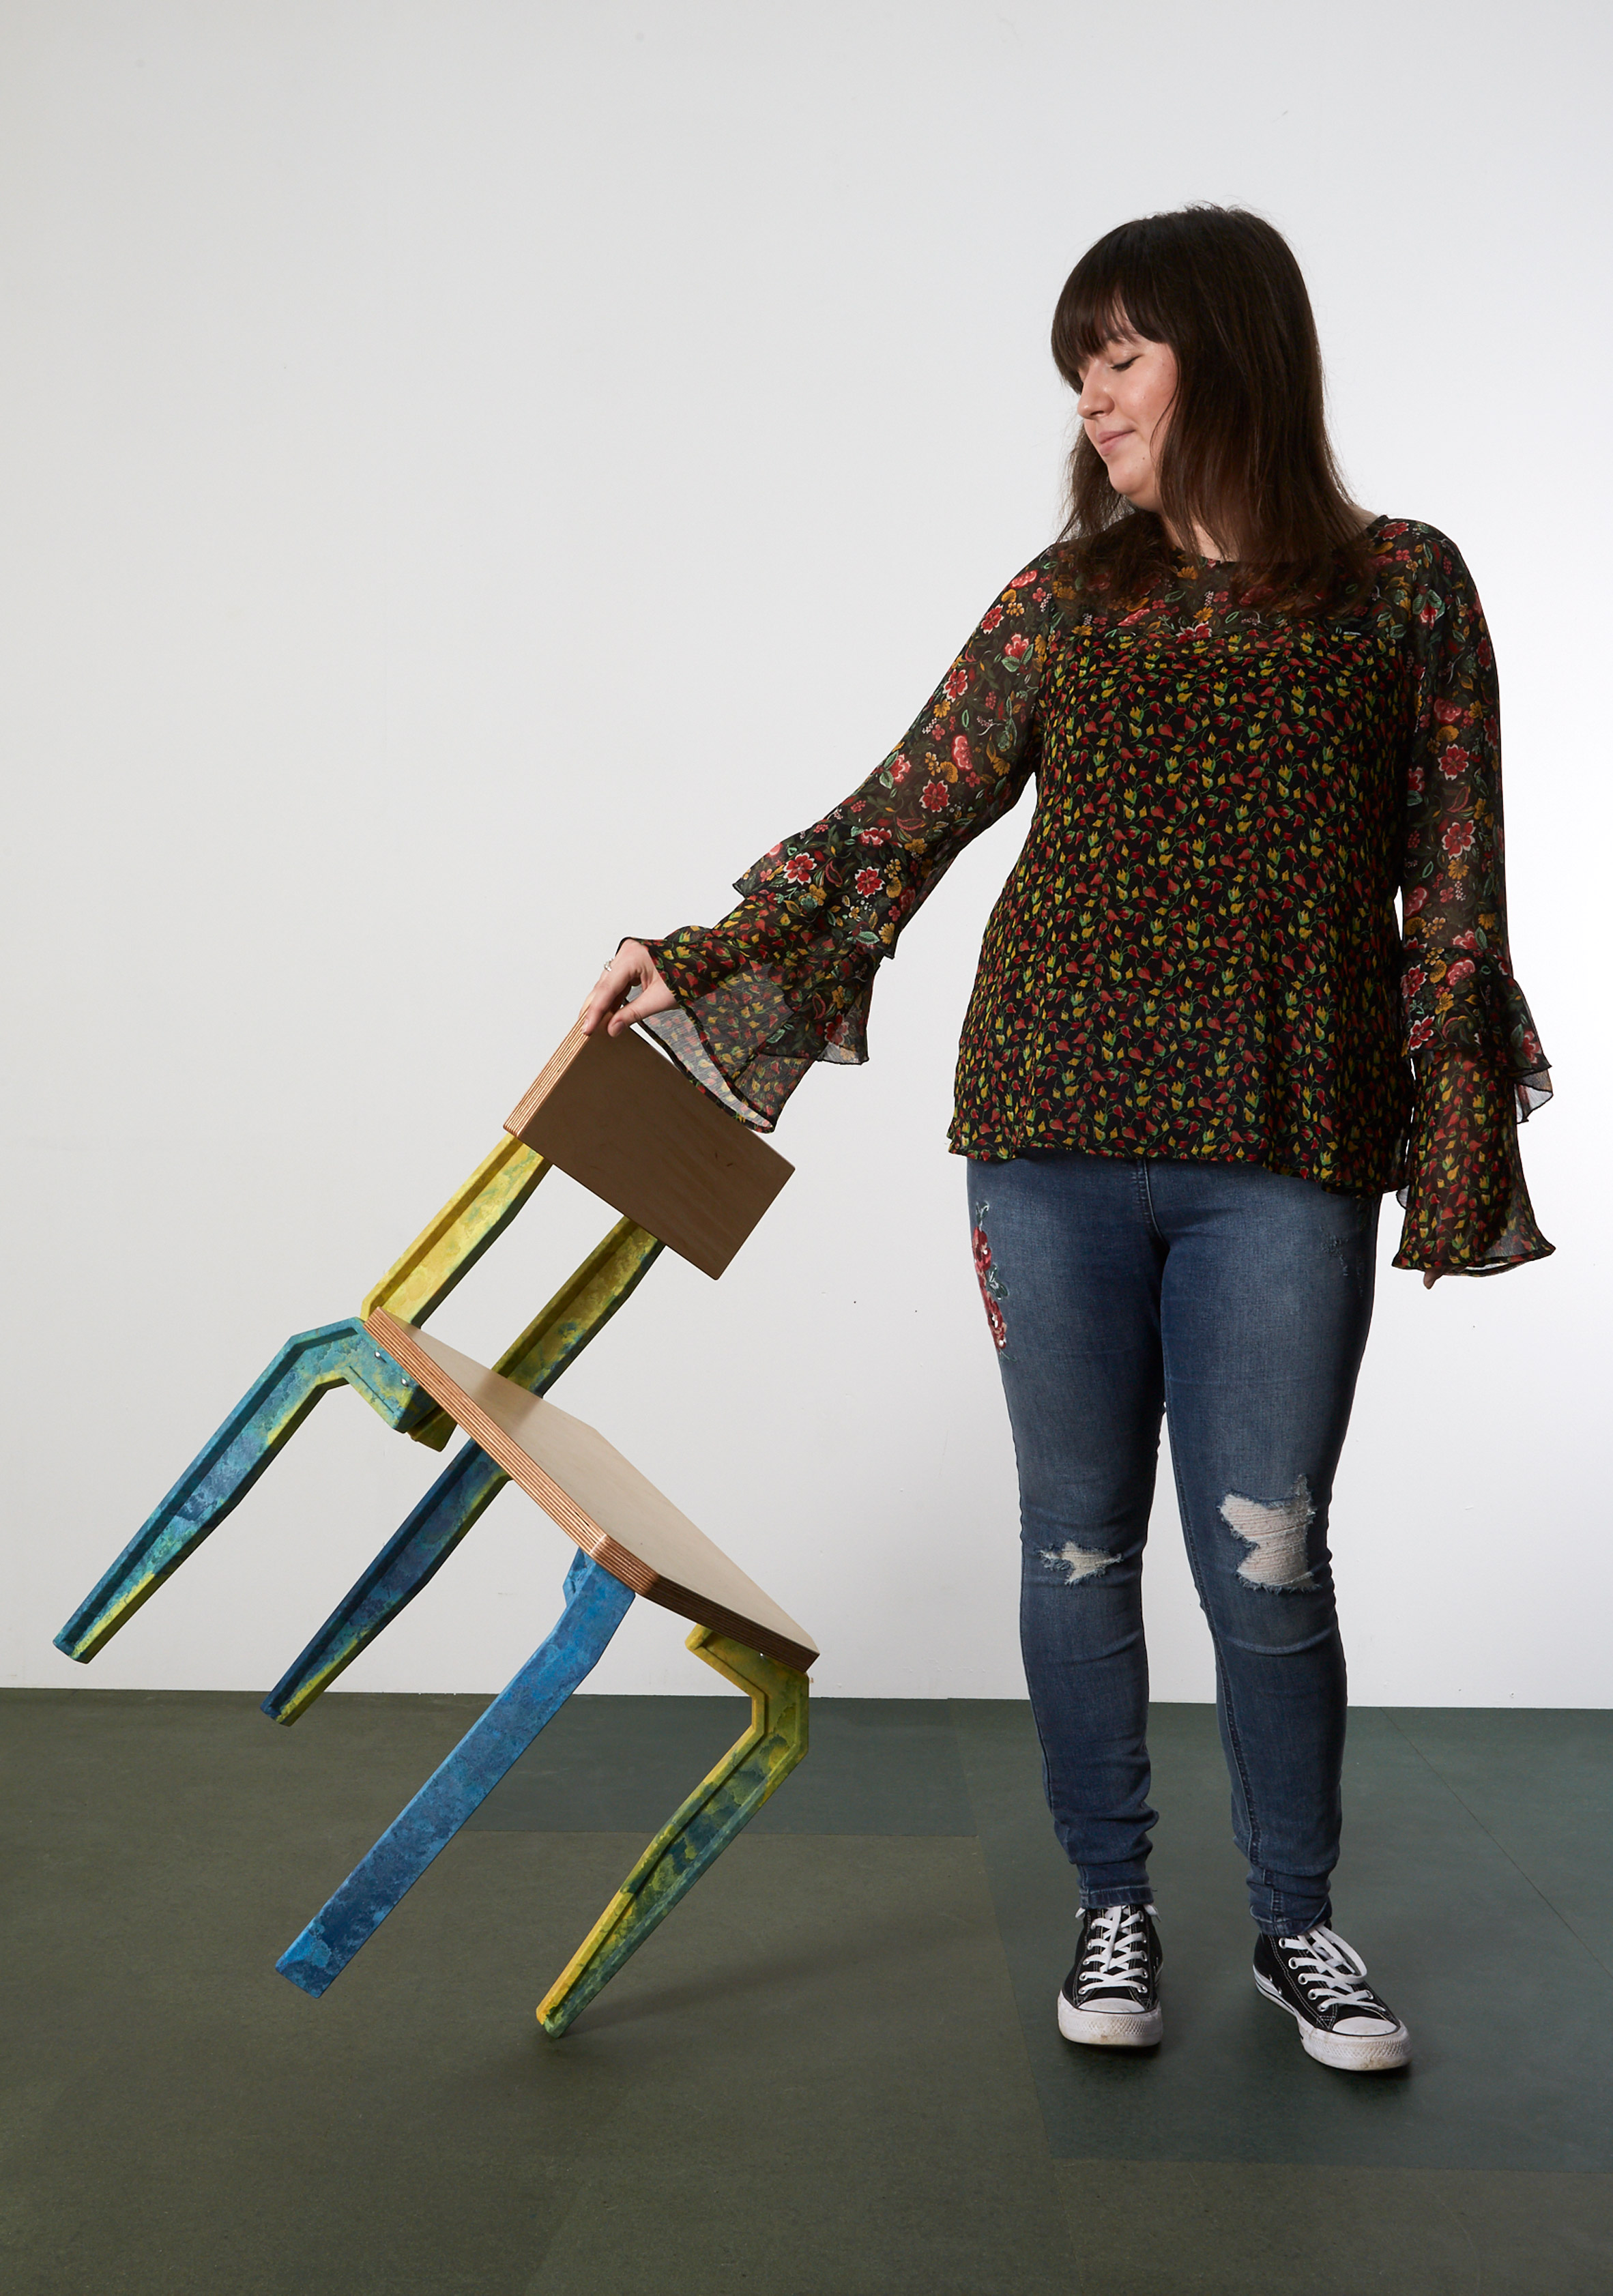 Spacemakers create sell-able furniture to change perceptions of youth in north-west London